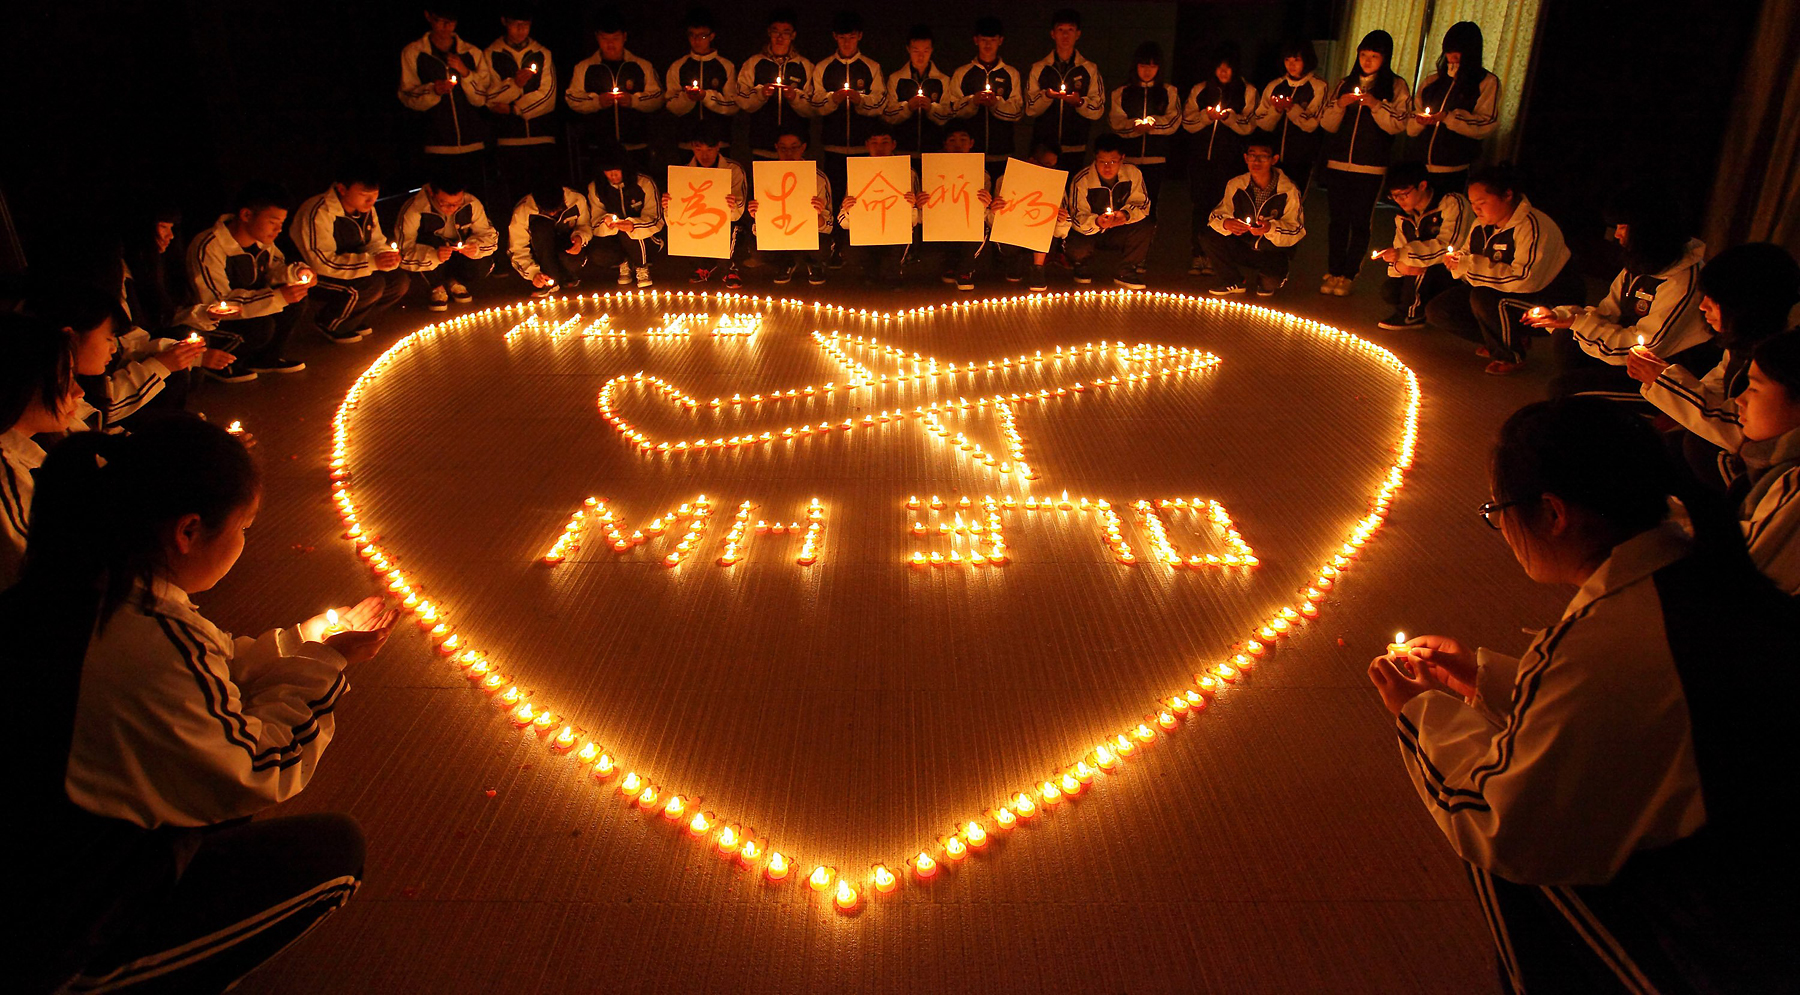 Students Pray For Passengers Onboard MH370 In Zhuji